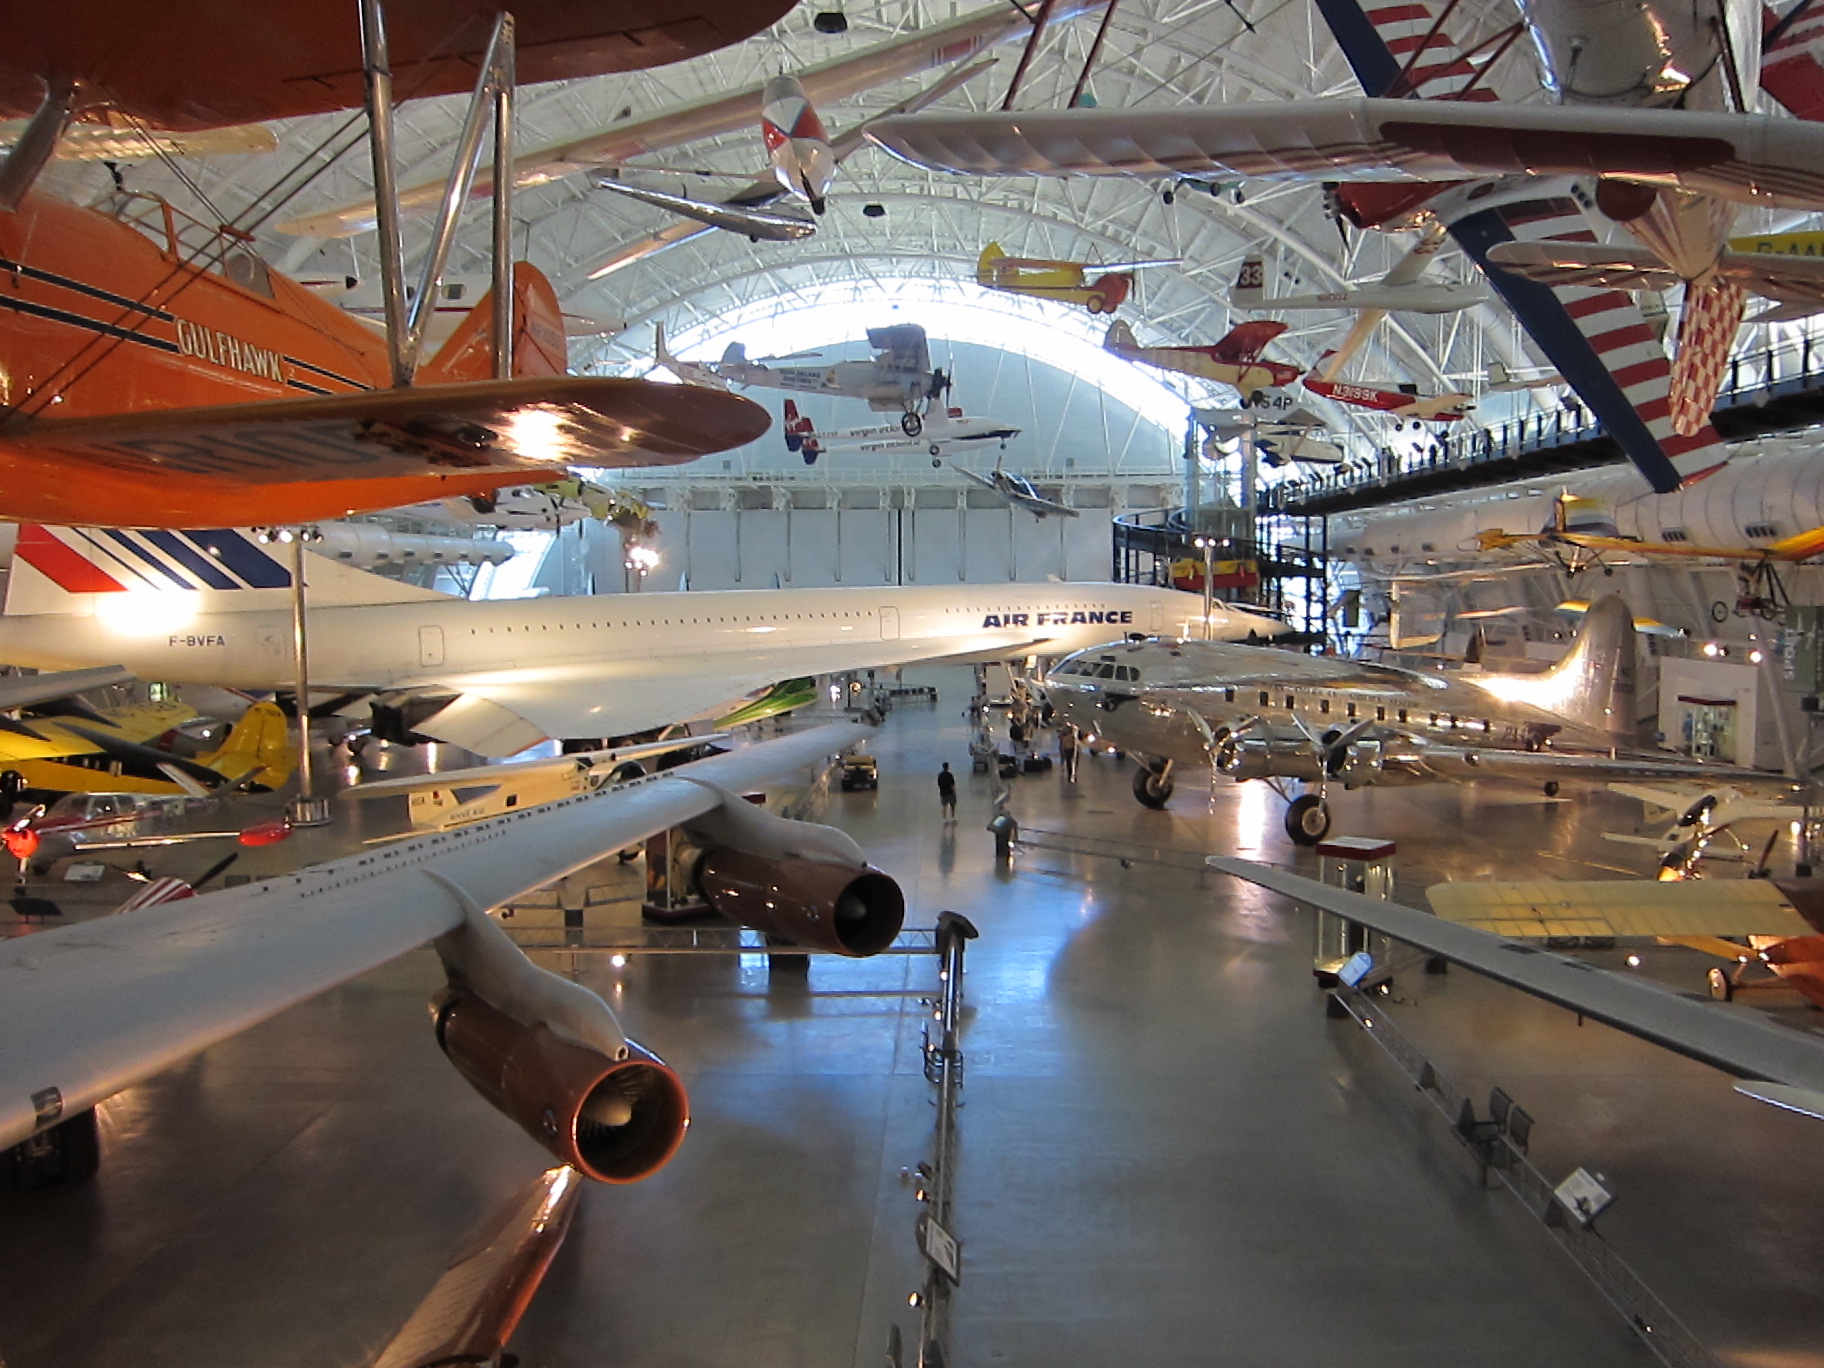 the museum is filled with antique airplanes in rows